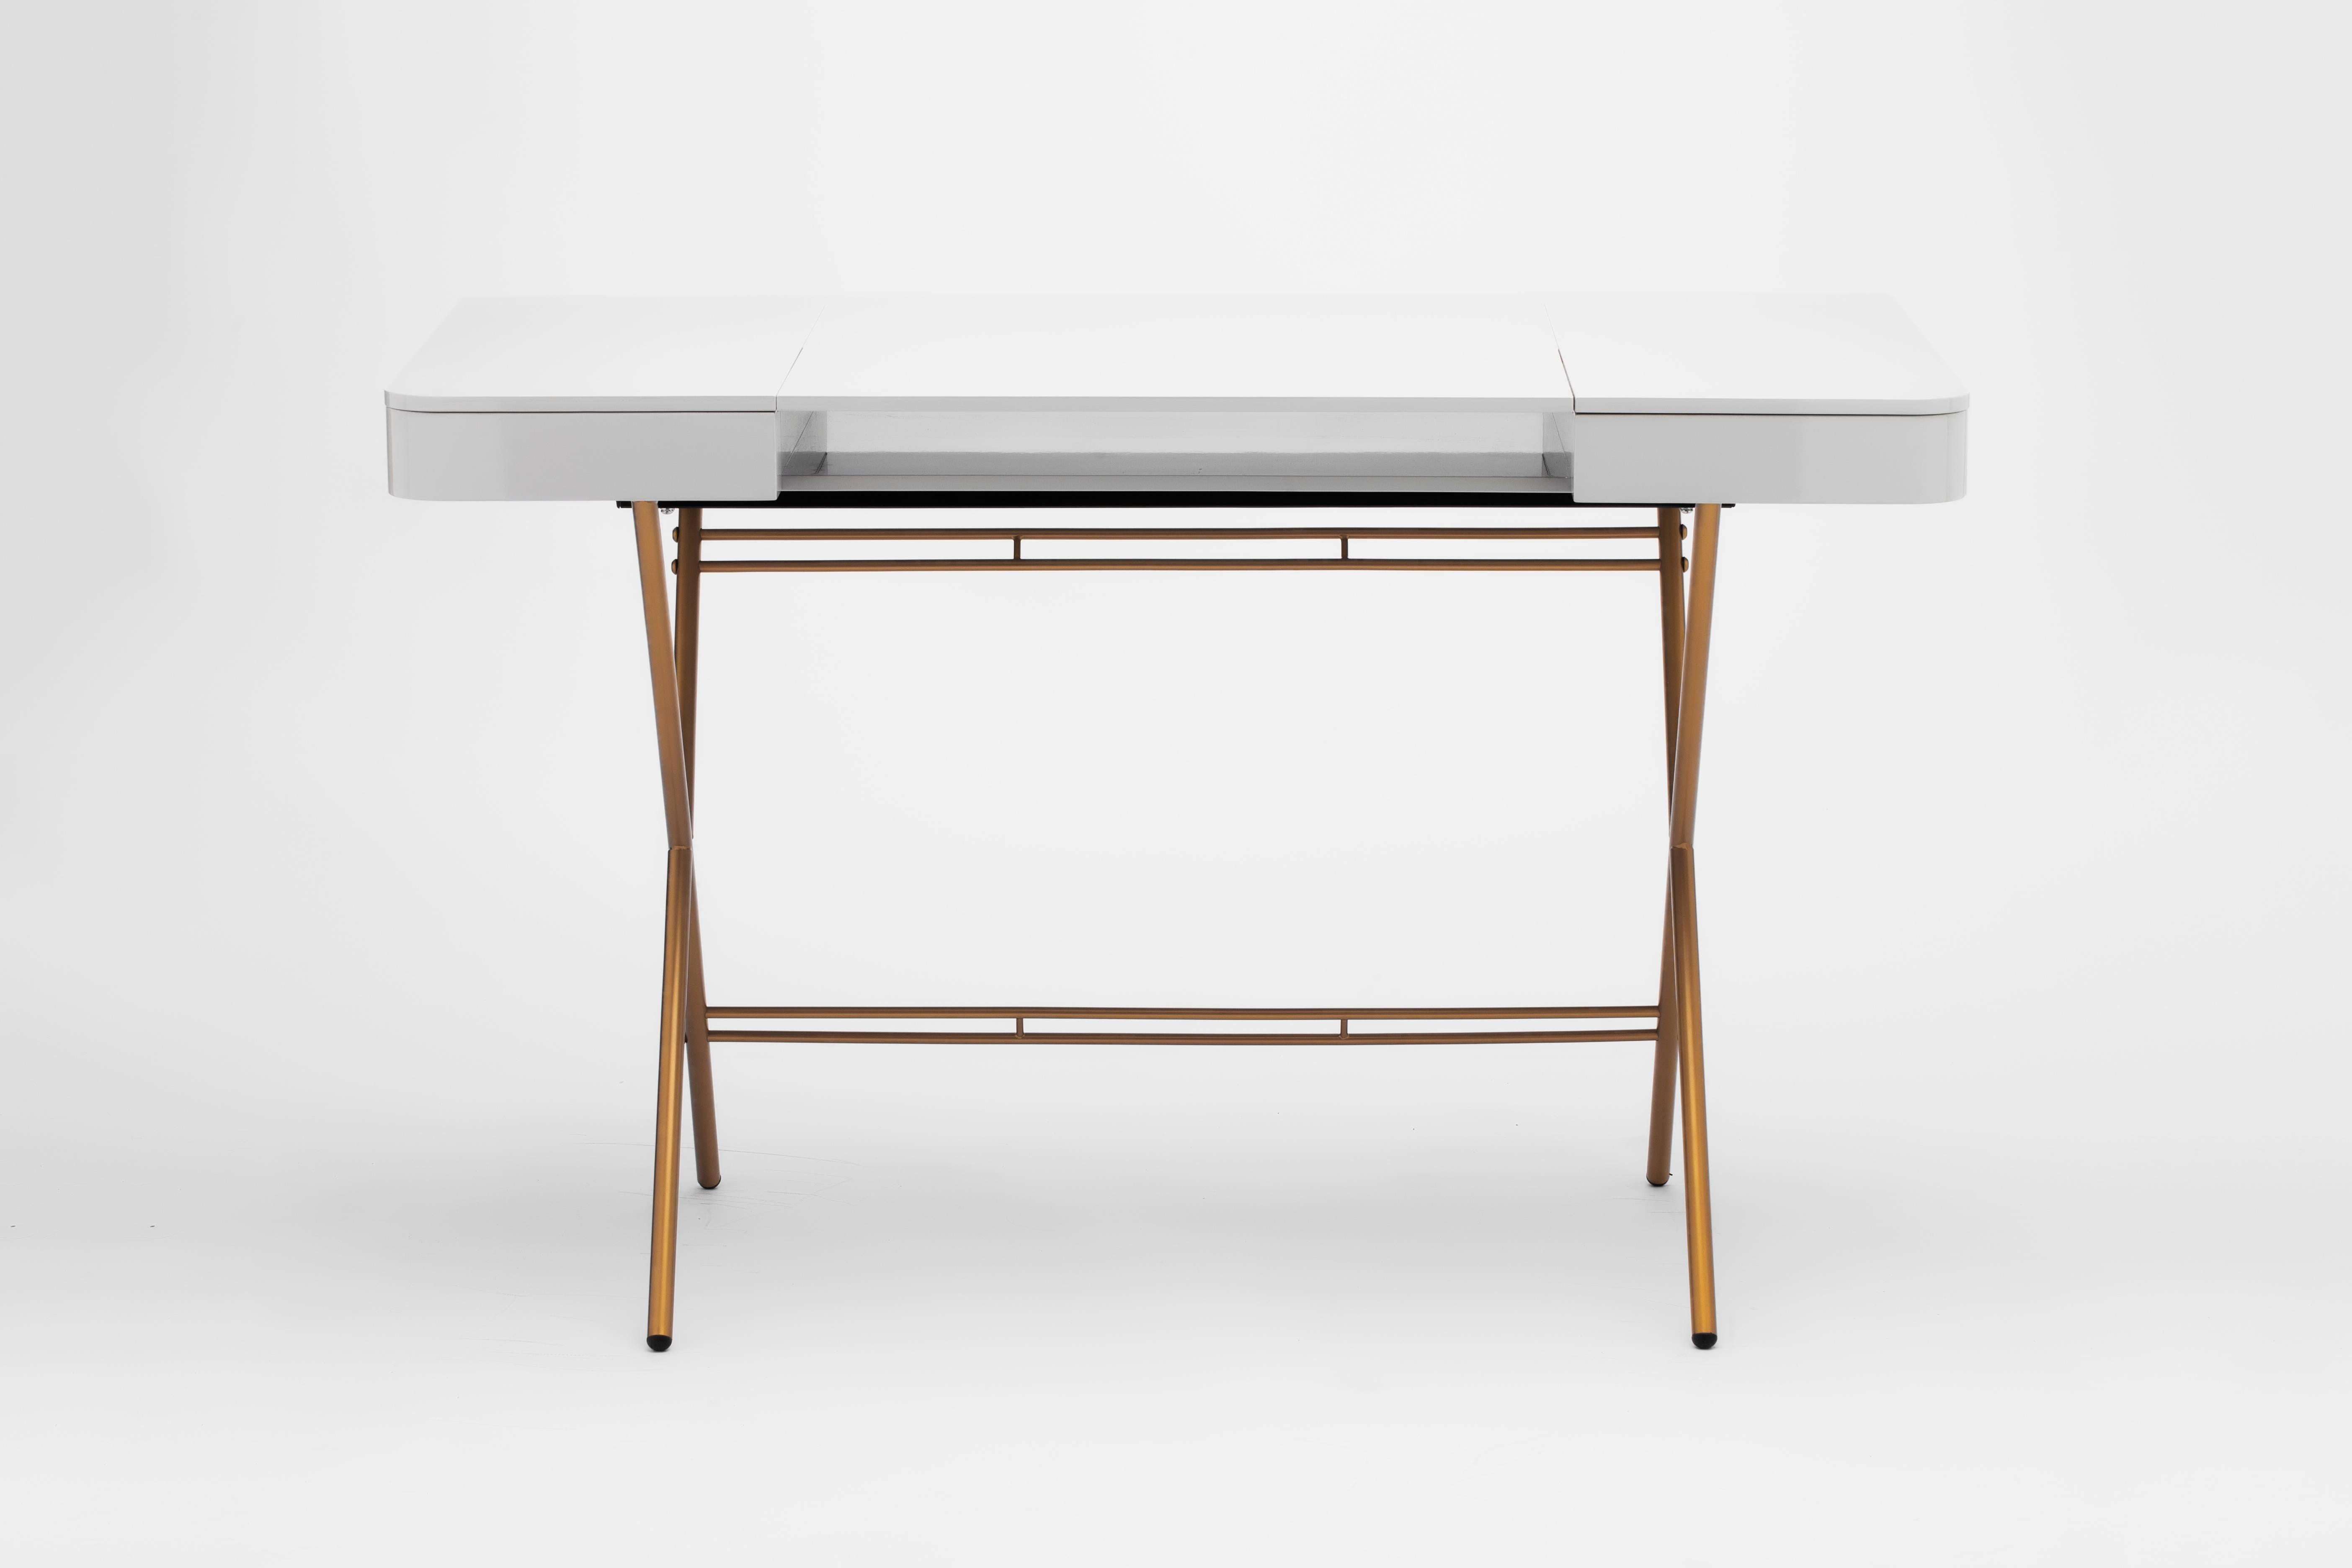 Cosimo desk was designed by the architect Marco Zanuso Jr for luxury French furniture brand, Adentro Paris. Ideal for a contemporary home office space, Cosimo desk comes in various finishes.
The central panel of the desktop folds back to reveal a